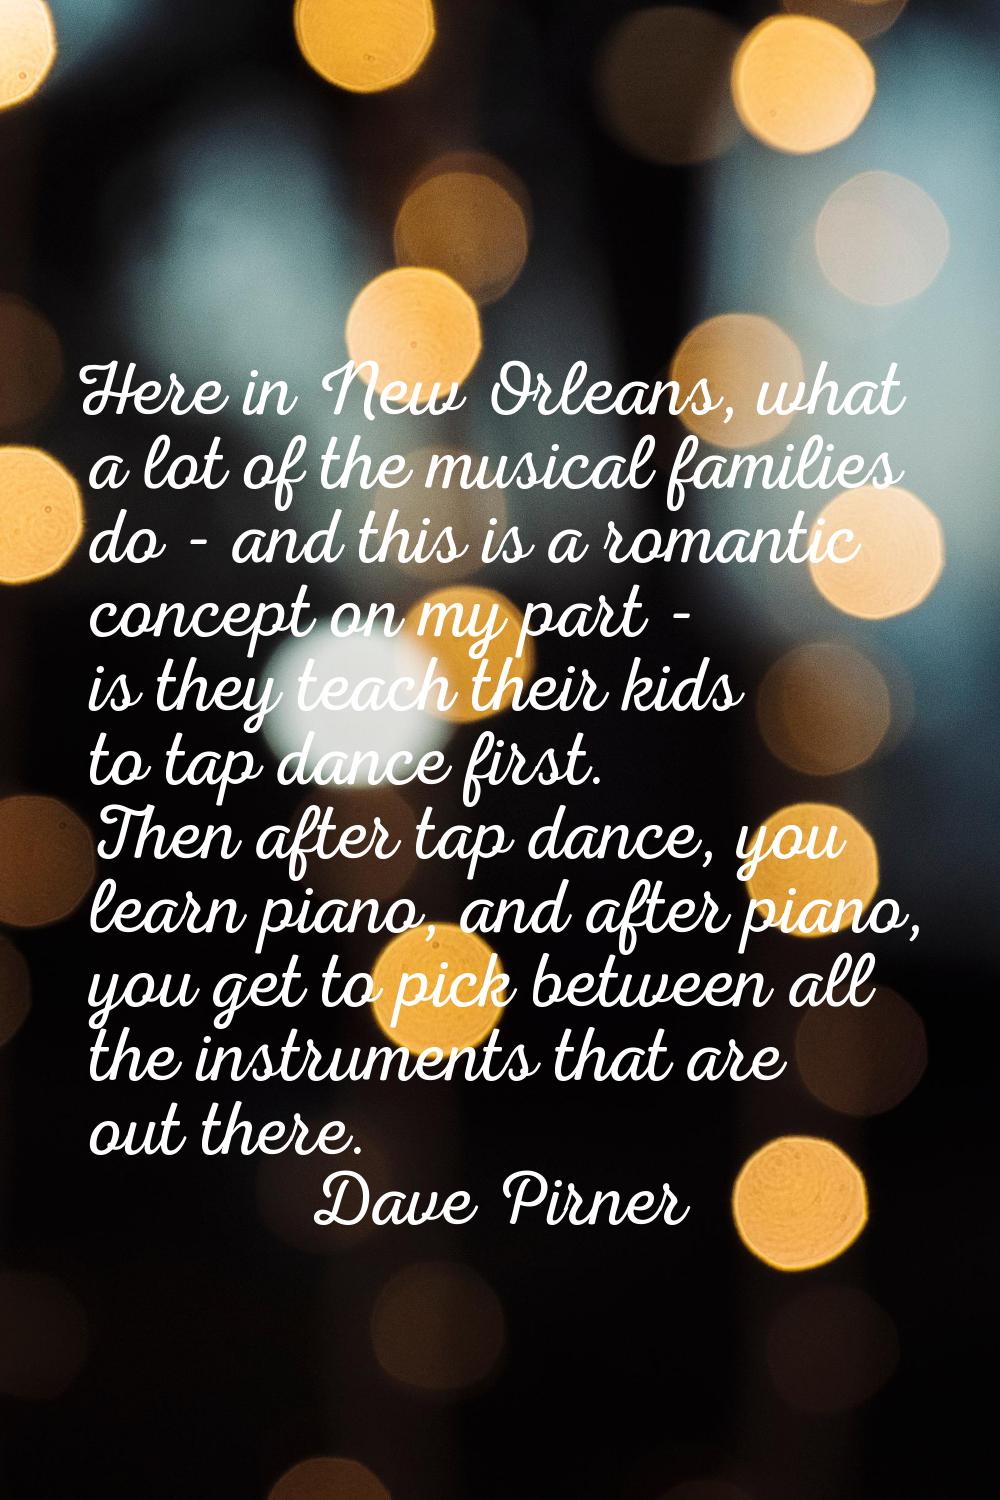 Here in New Orleans, what a lot of the musical families do - and this is a romantic concept on my p